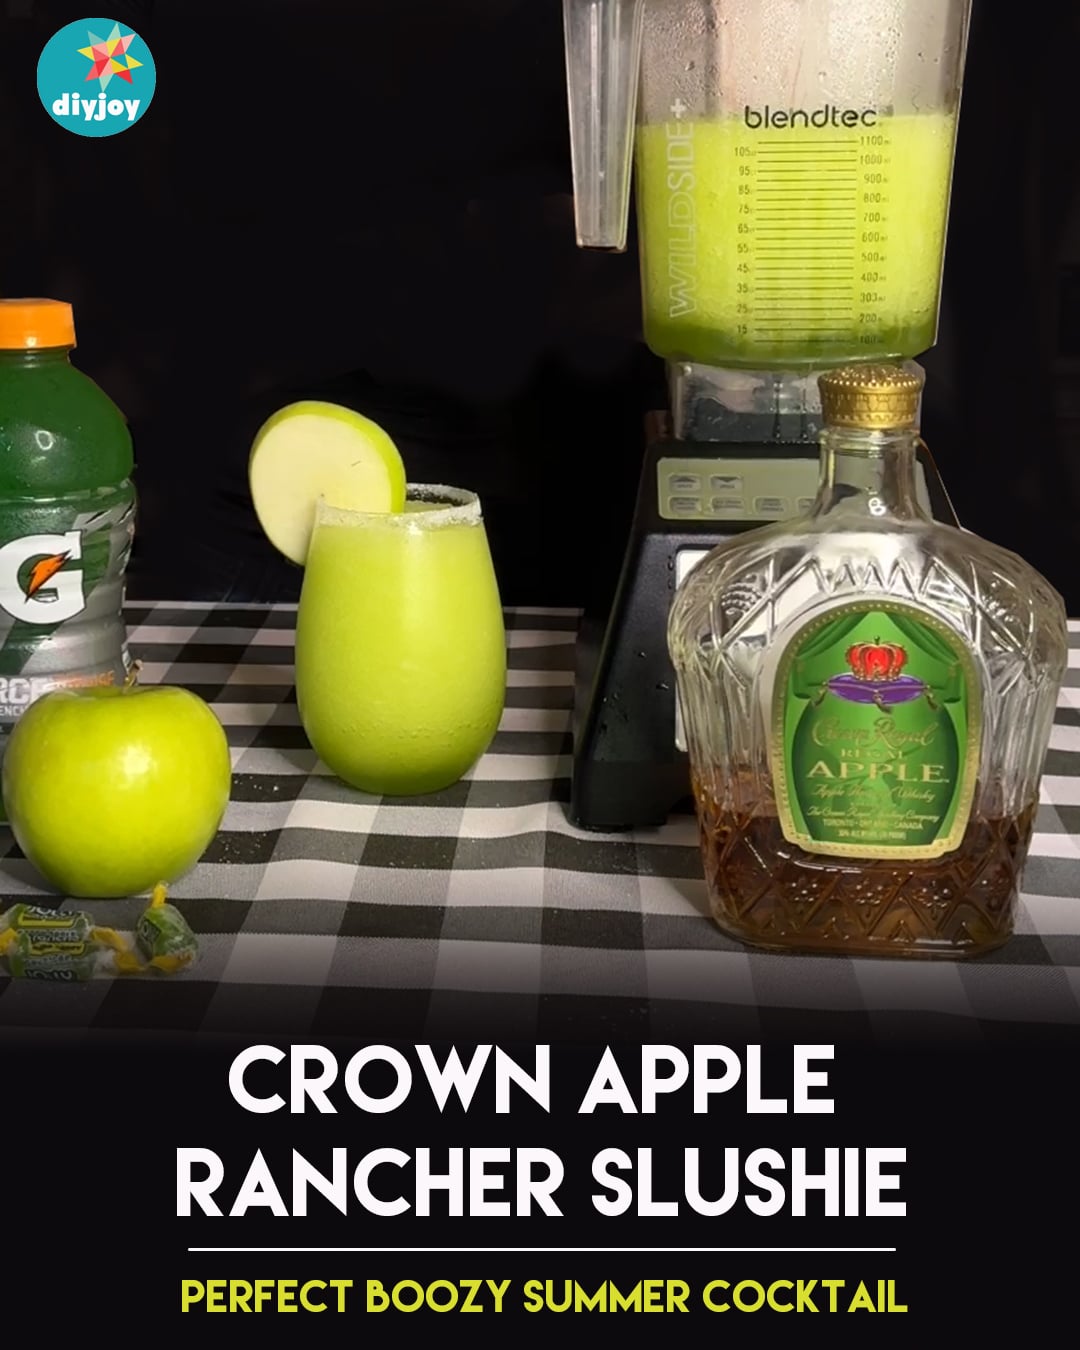 Crown Royal Apple Rancher Slushie Recipe for a Creative Frozen Summer Drink Idea with Booze